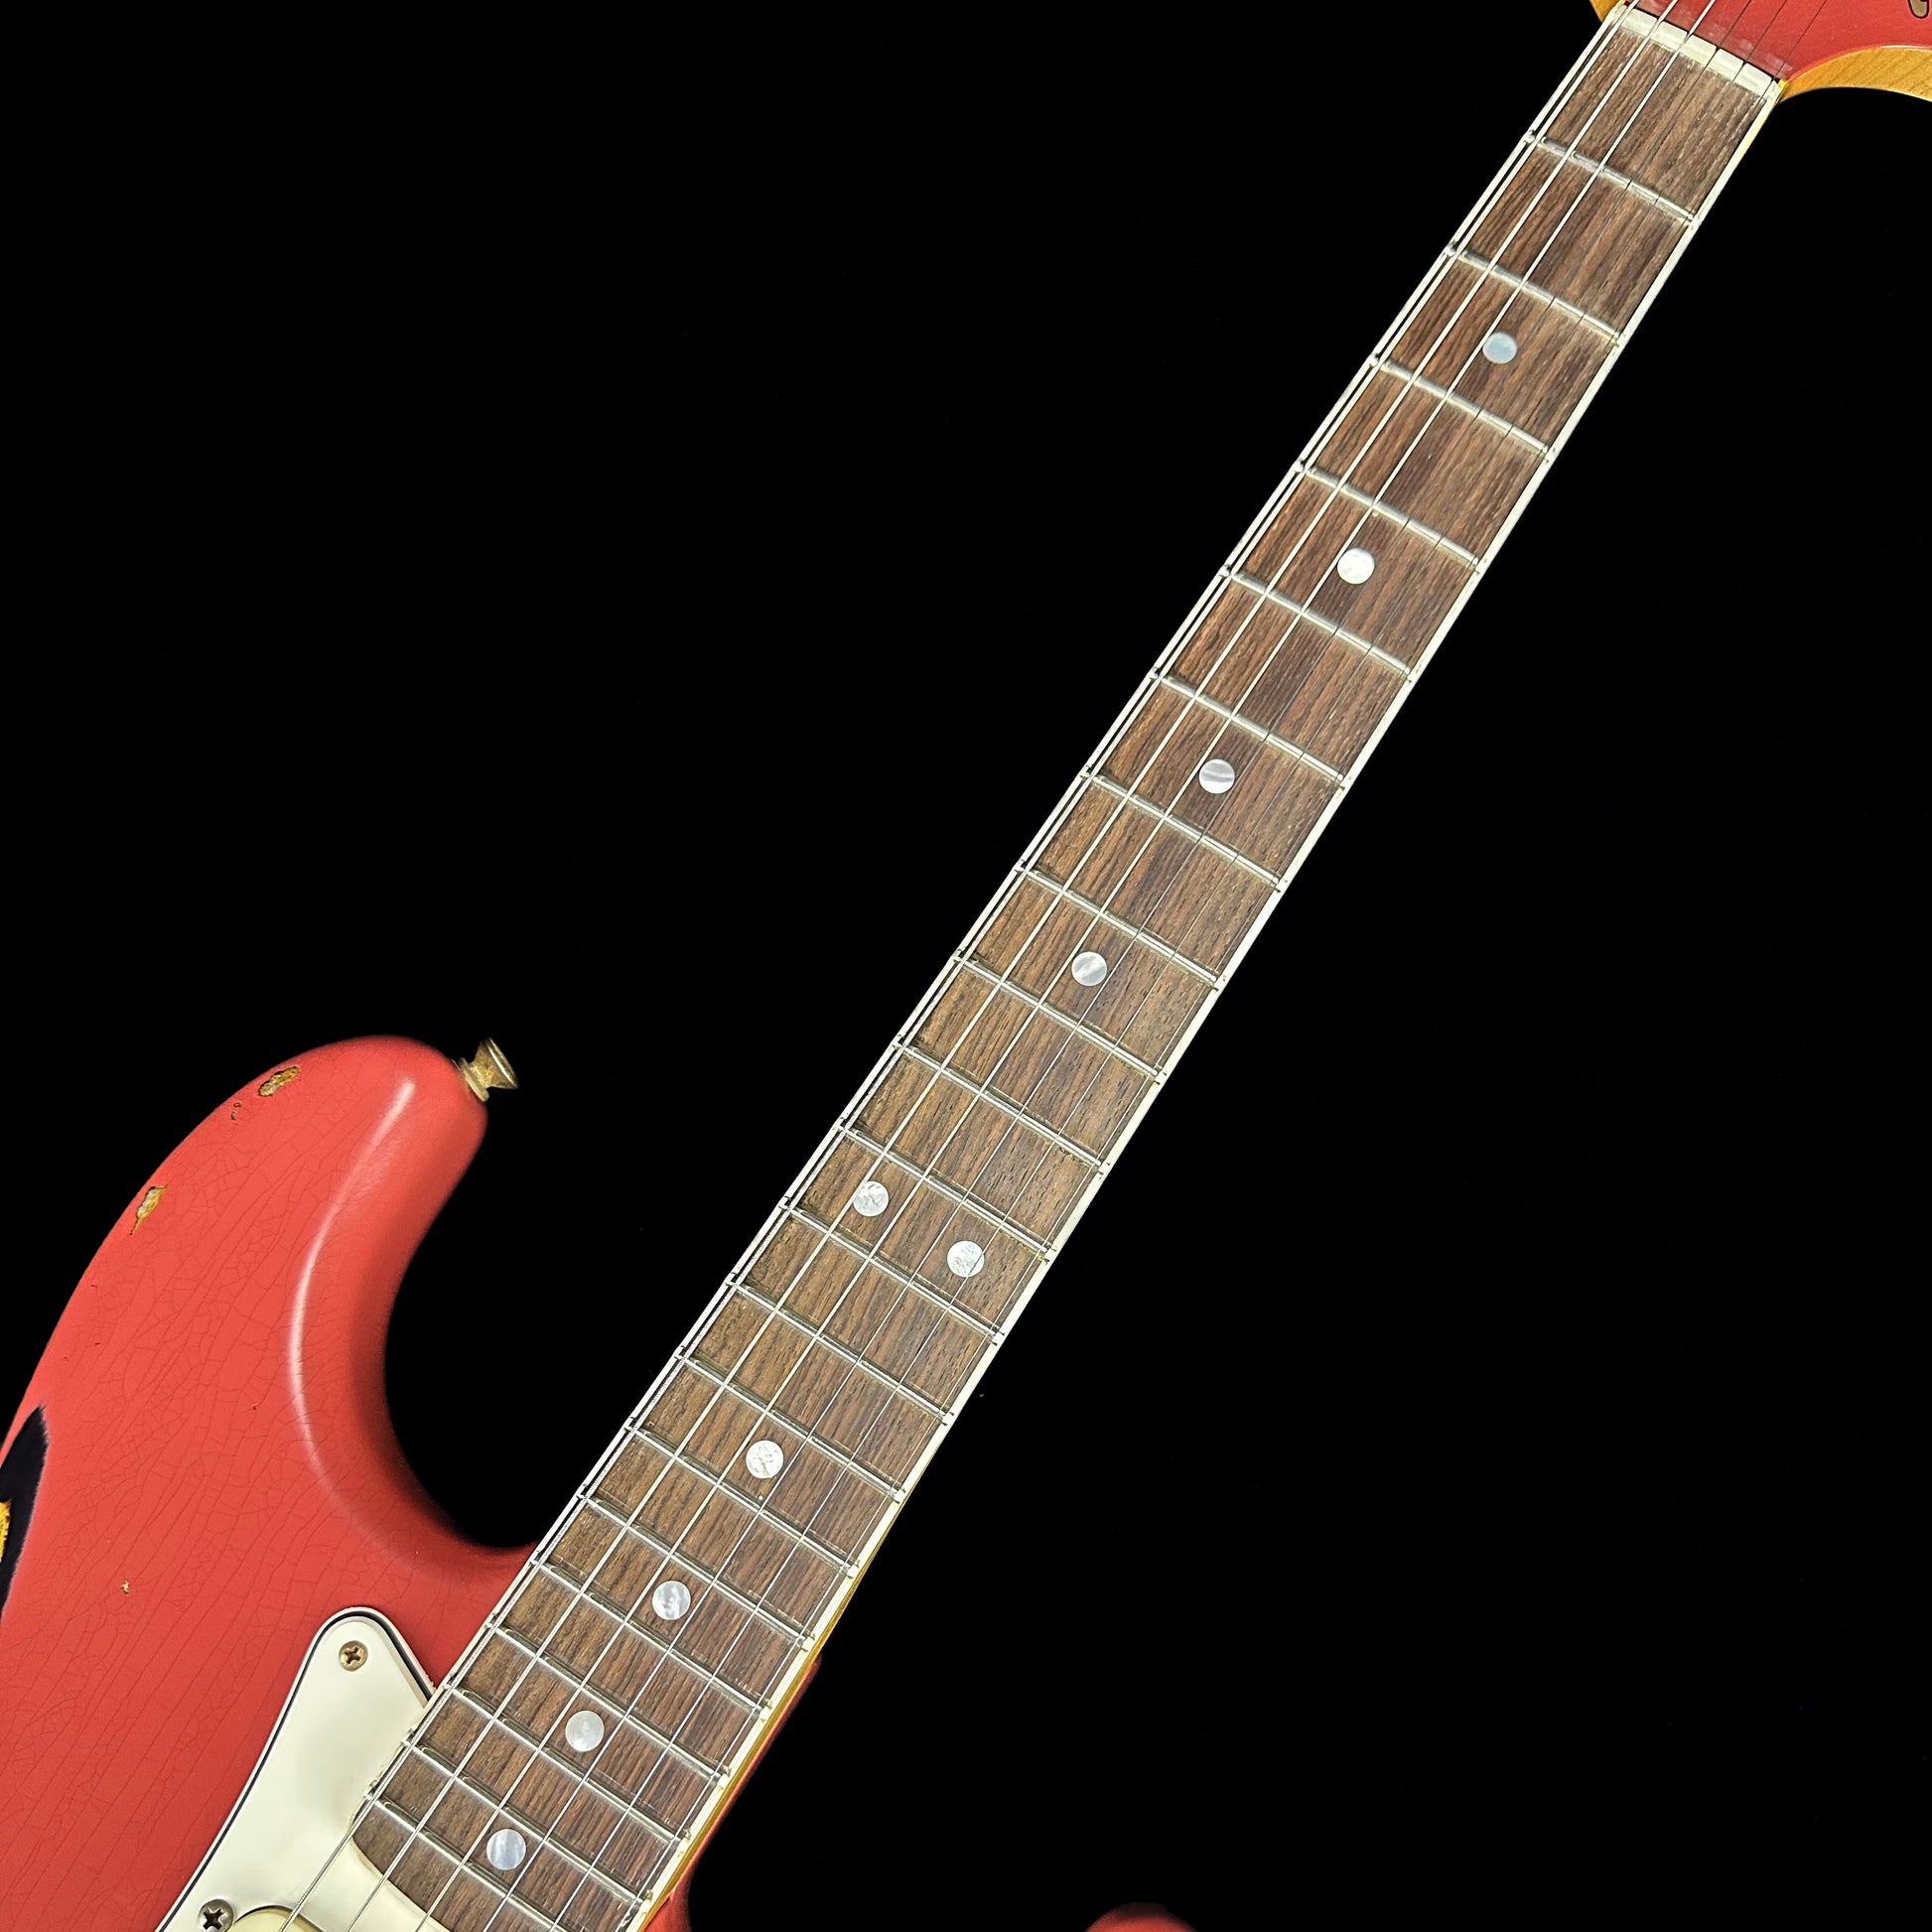 Front angle of Fender Custom Shop Limited 67 Stratocaster Heavy Relic Aged Fiesta Red/3-Tone Sunburst fretboard.